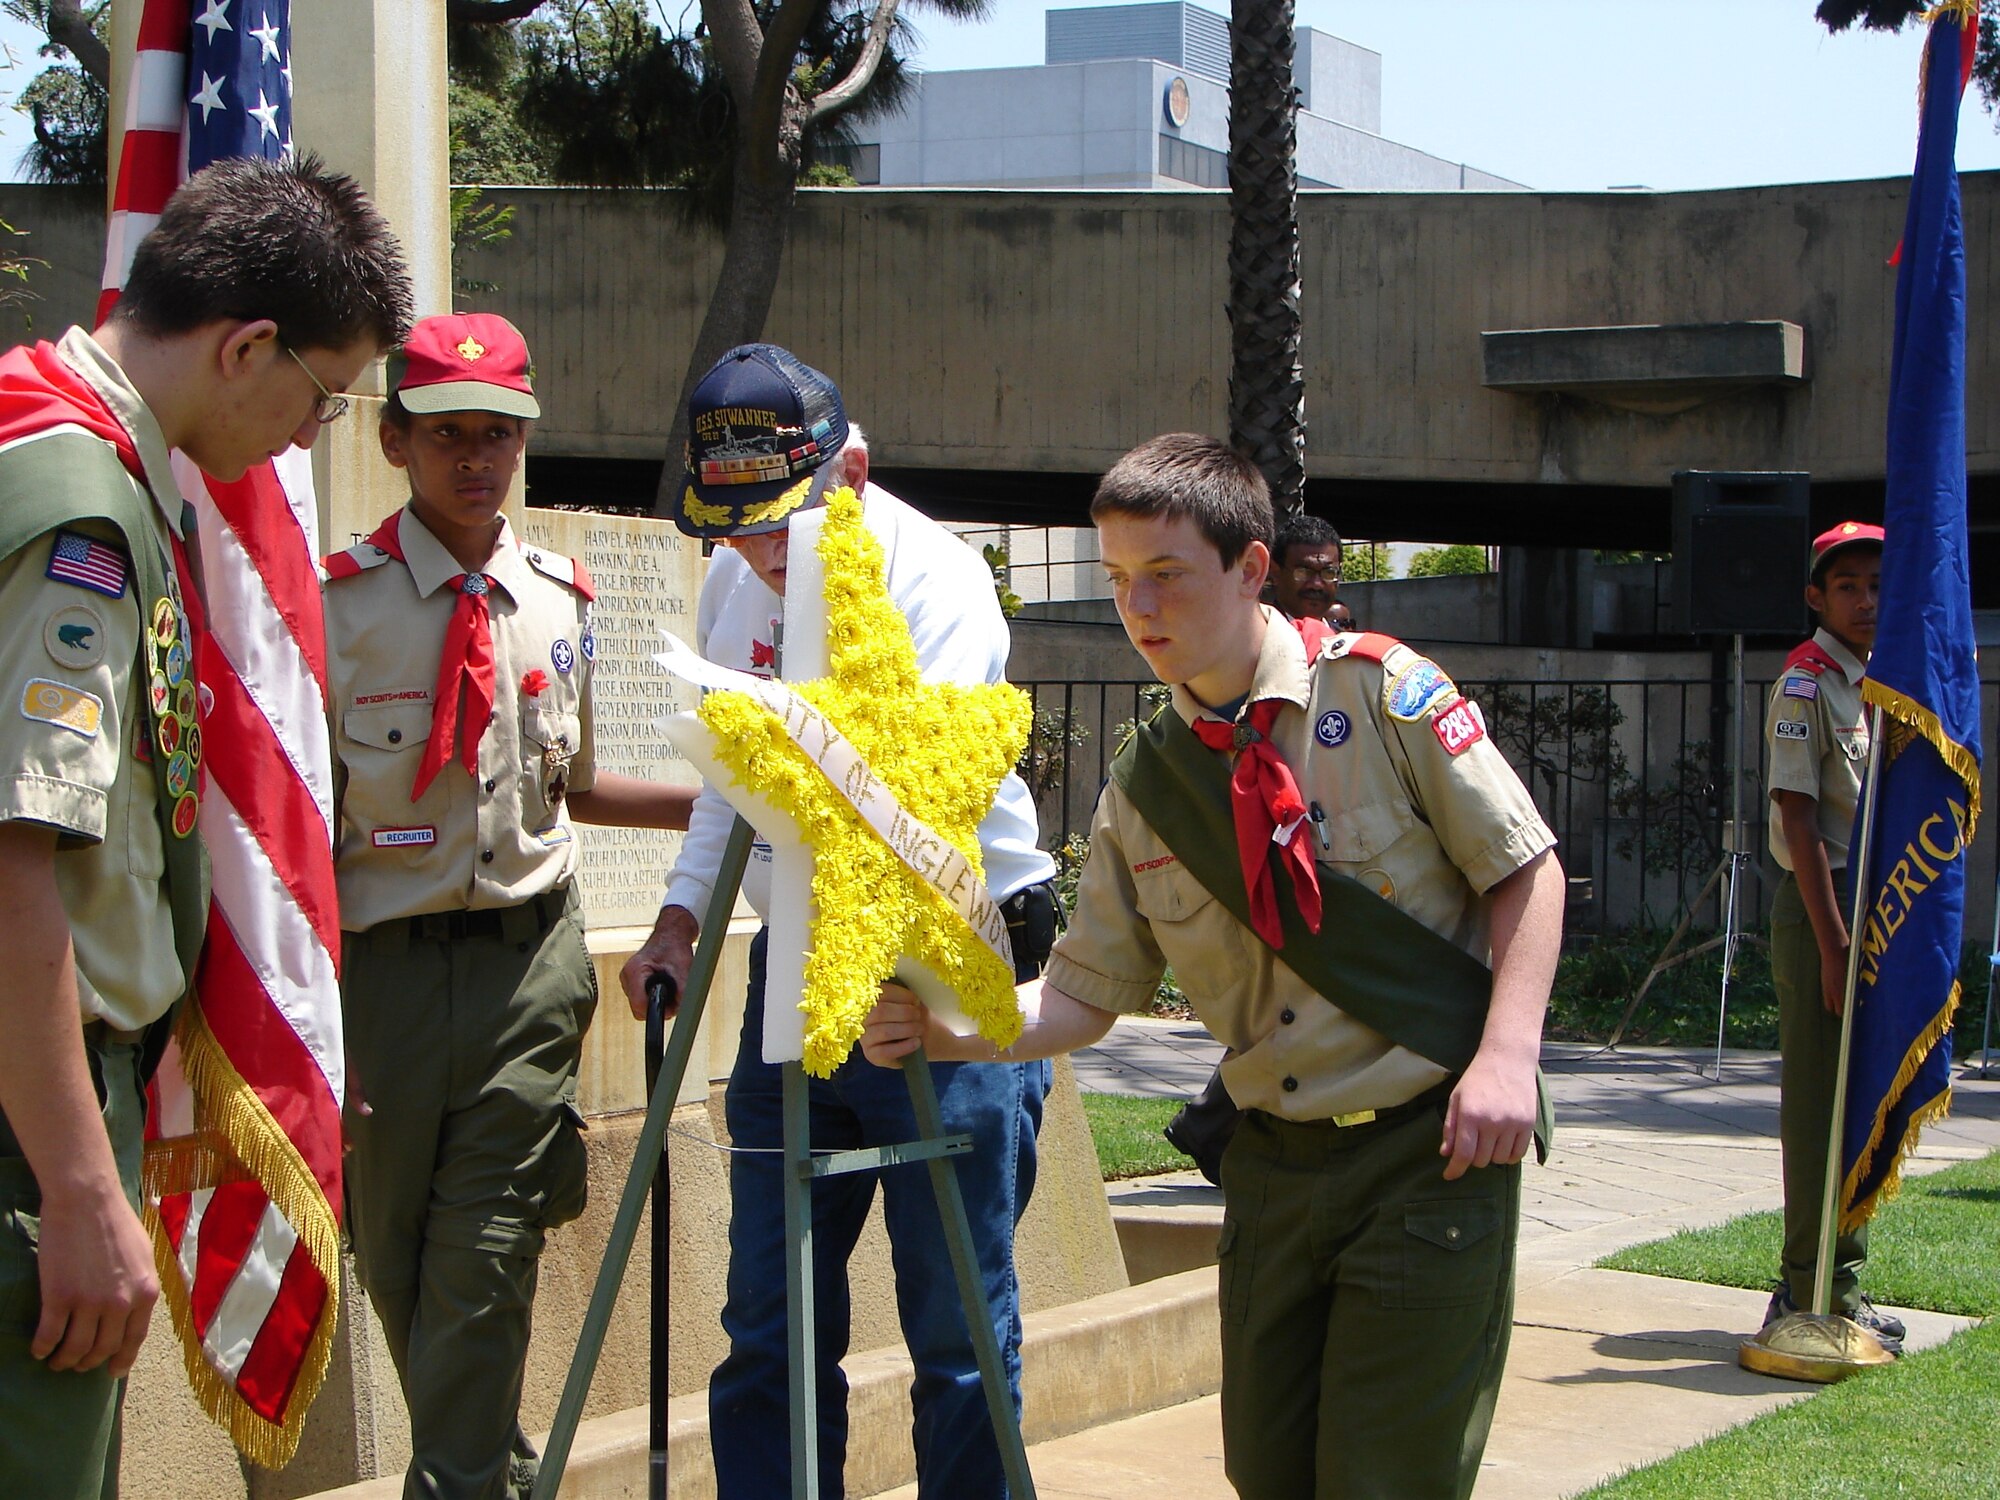 Aided by members of Boy Scout Troop 283, a WW II vet placed flowers at the 59th Annual Inglewood Memorial Day Service, May 28. The service honored fallen heroes from the city and was attended by veterans who served from World War II to Operation Iraqi Freedom. Col. Douglas Kendall, Spacelift Range Group Commander was the keynote speaker.